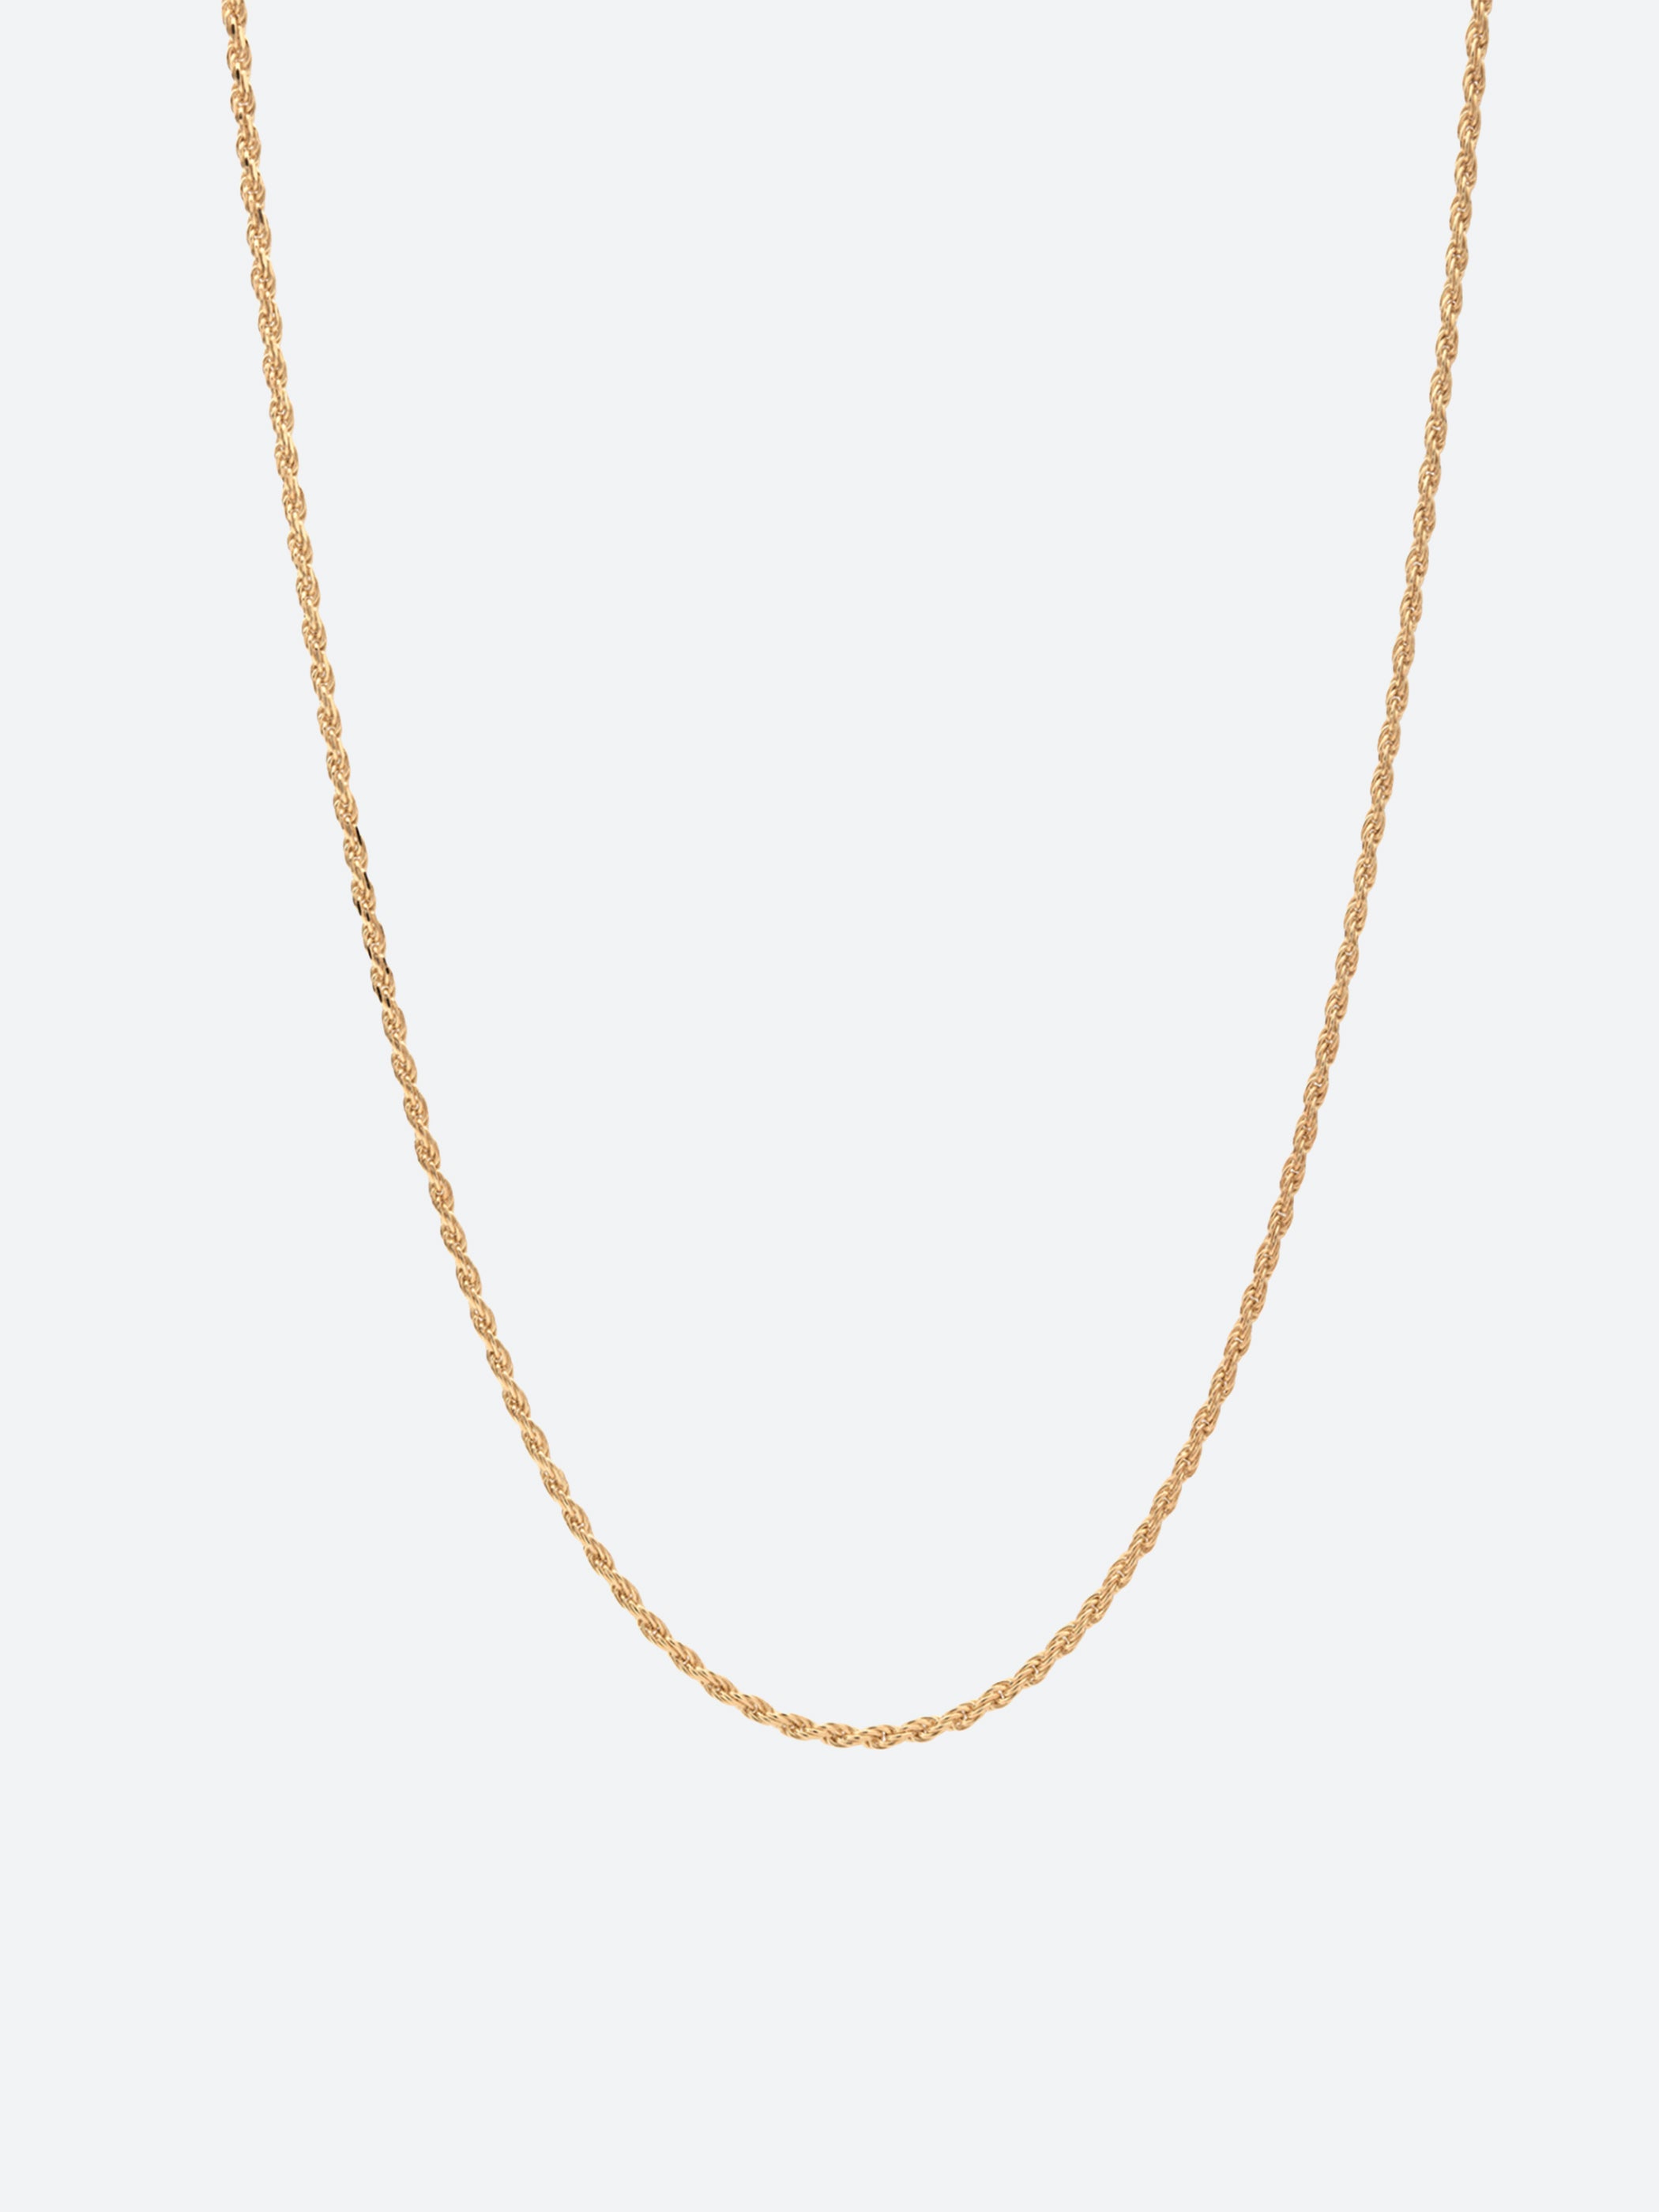 1.8mm Rope Chain